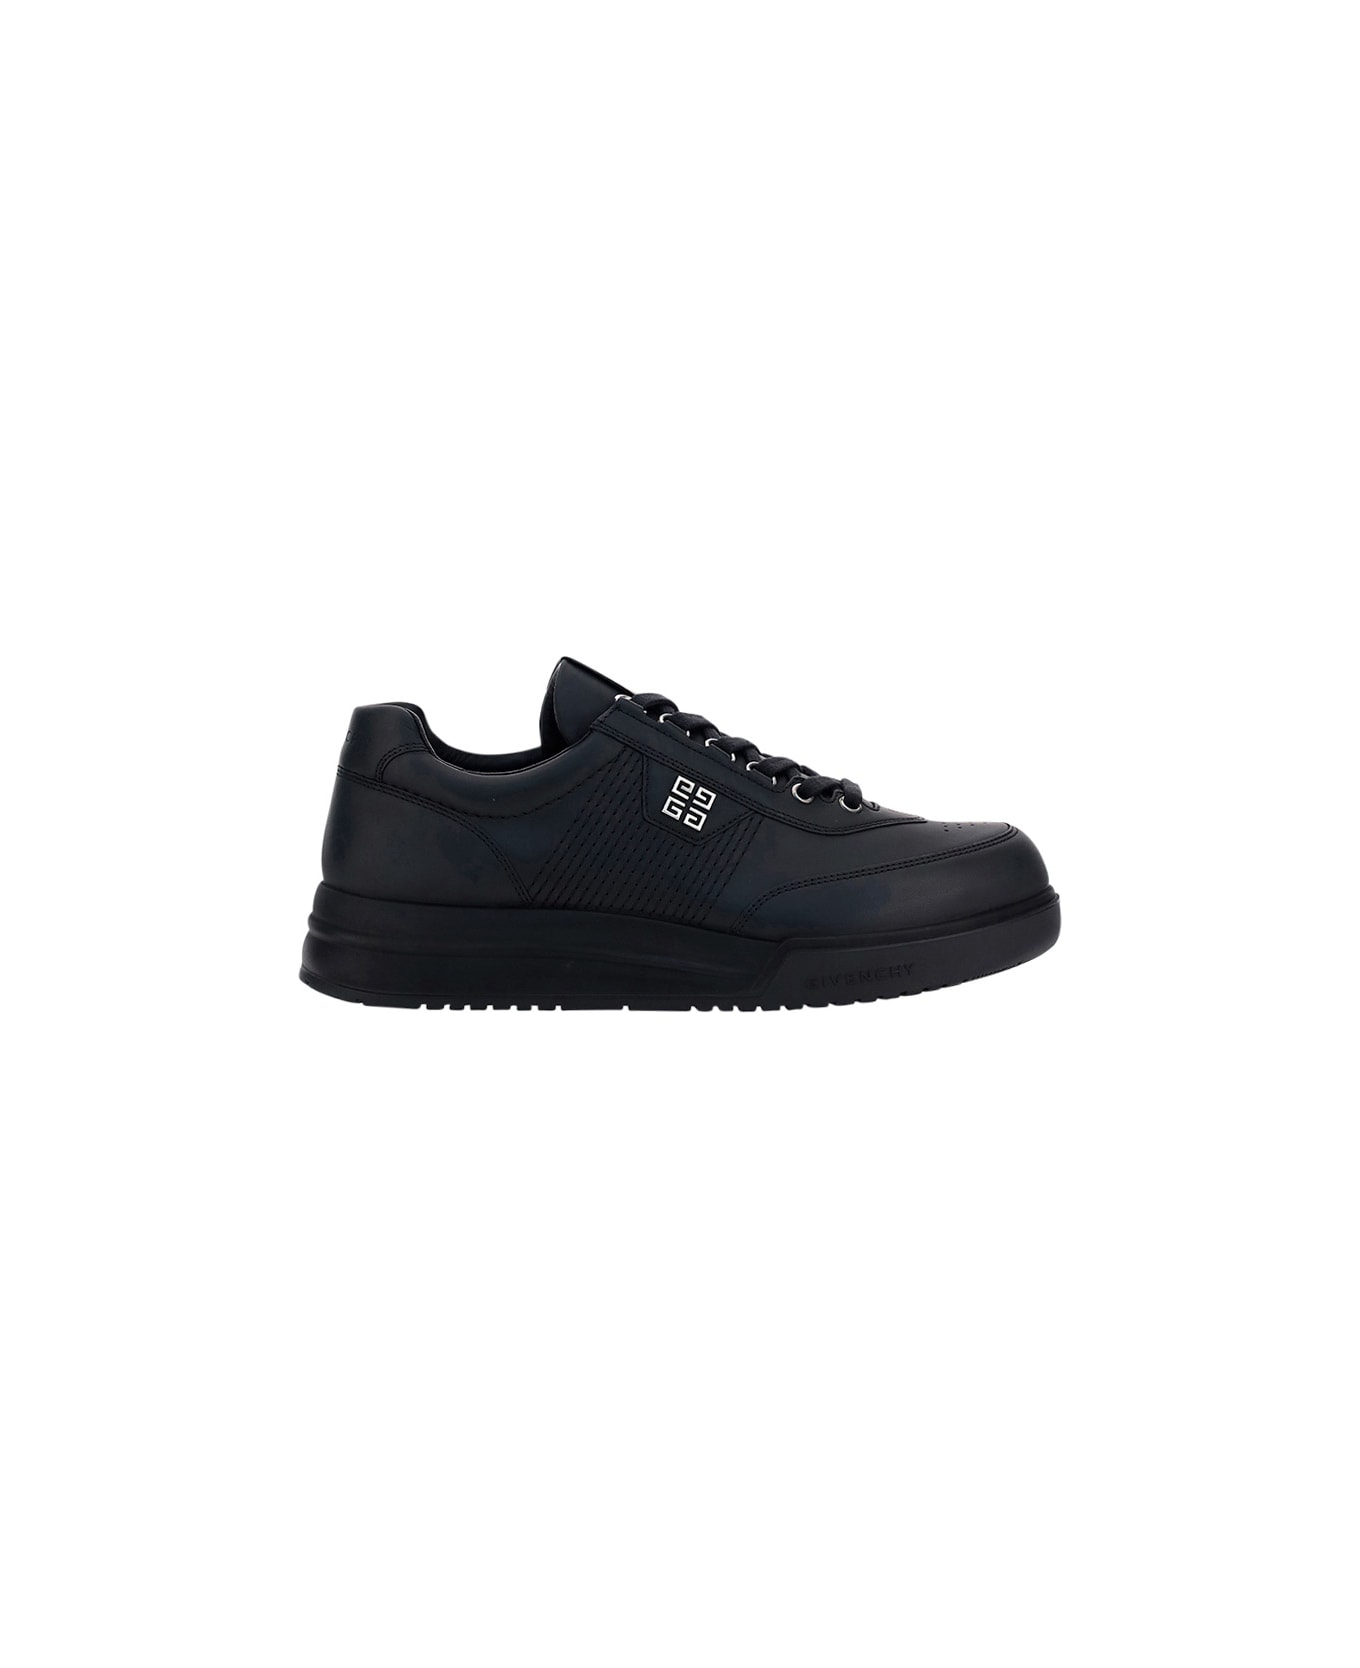 Givenchy 4g Sneakers - Black